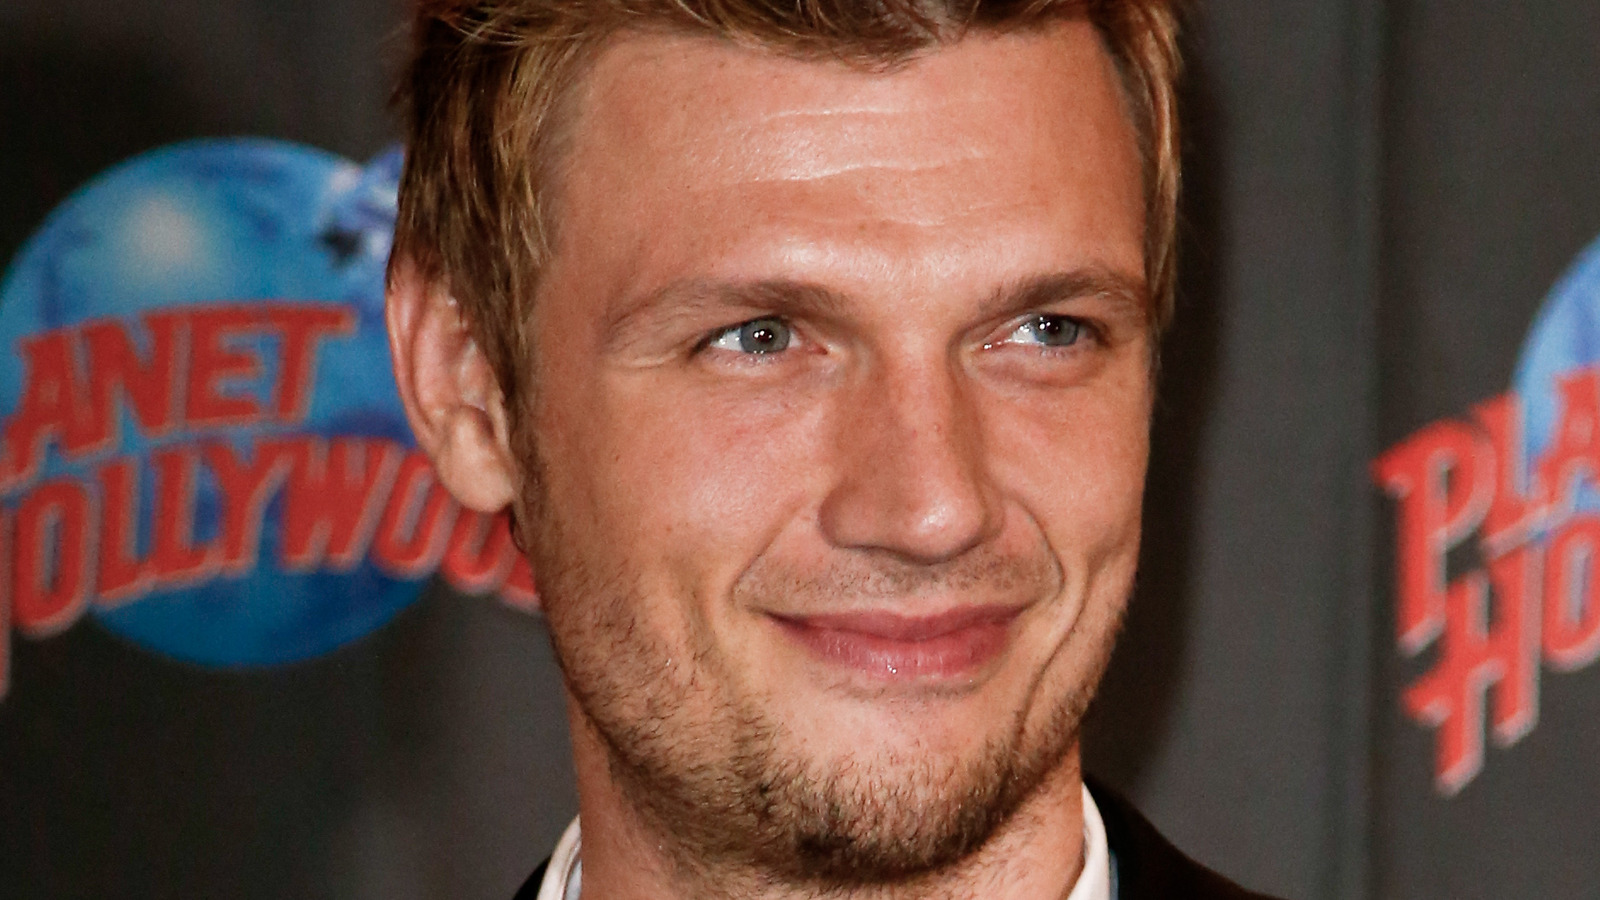 After the tragic death of his brother Aaron, Nick Carter takes time off from the spotlight